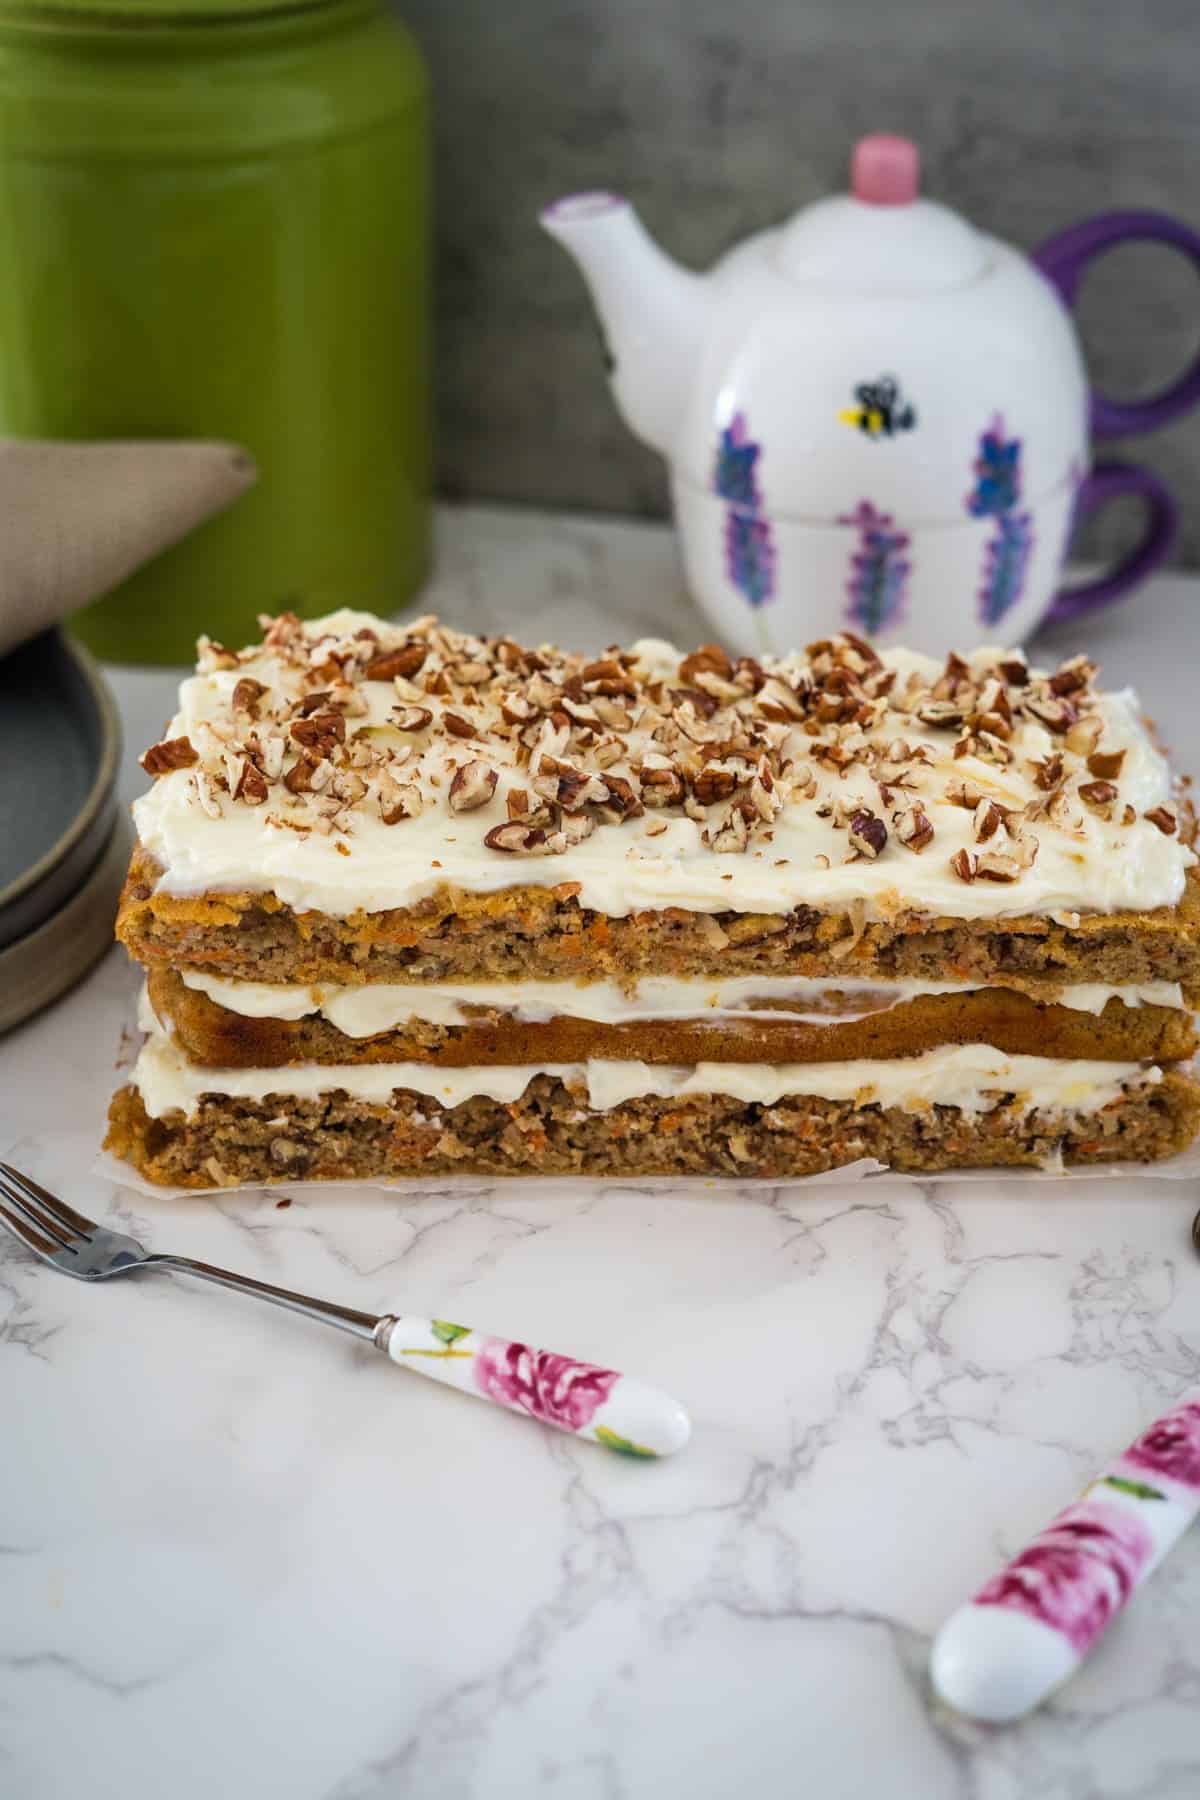 A layered carrot cake with cream cheese frosting and chopped nuts, served with a teapot on a marble surface.